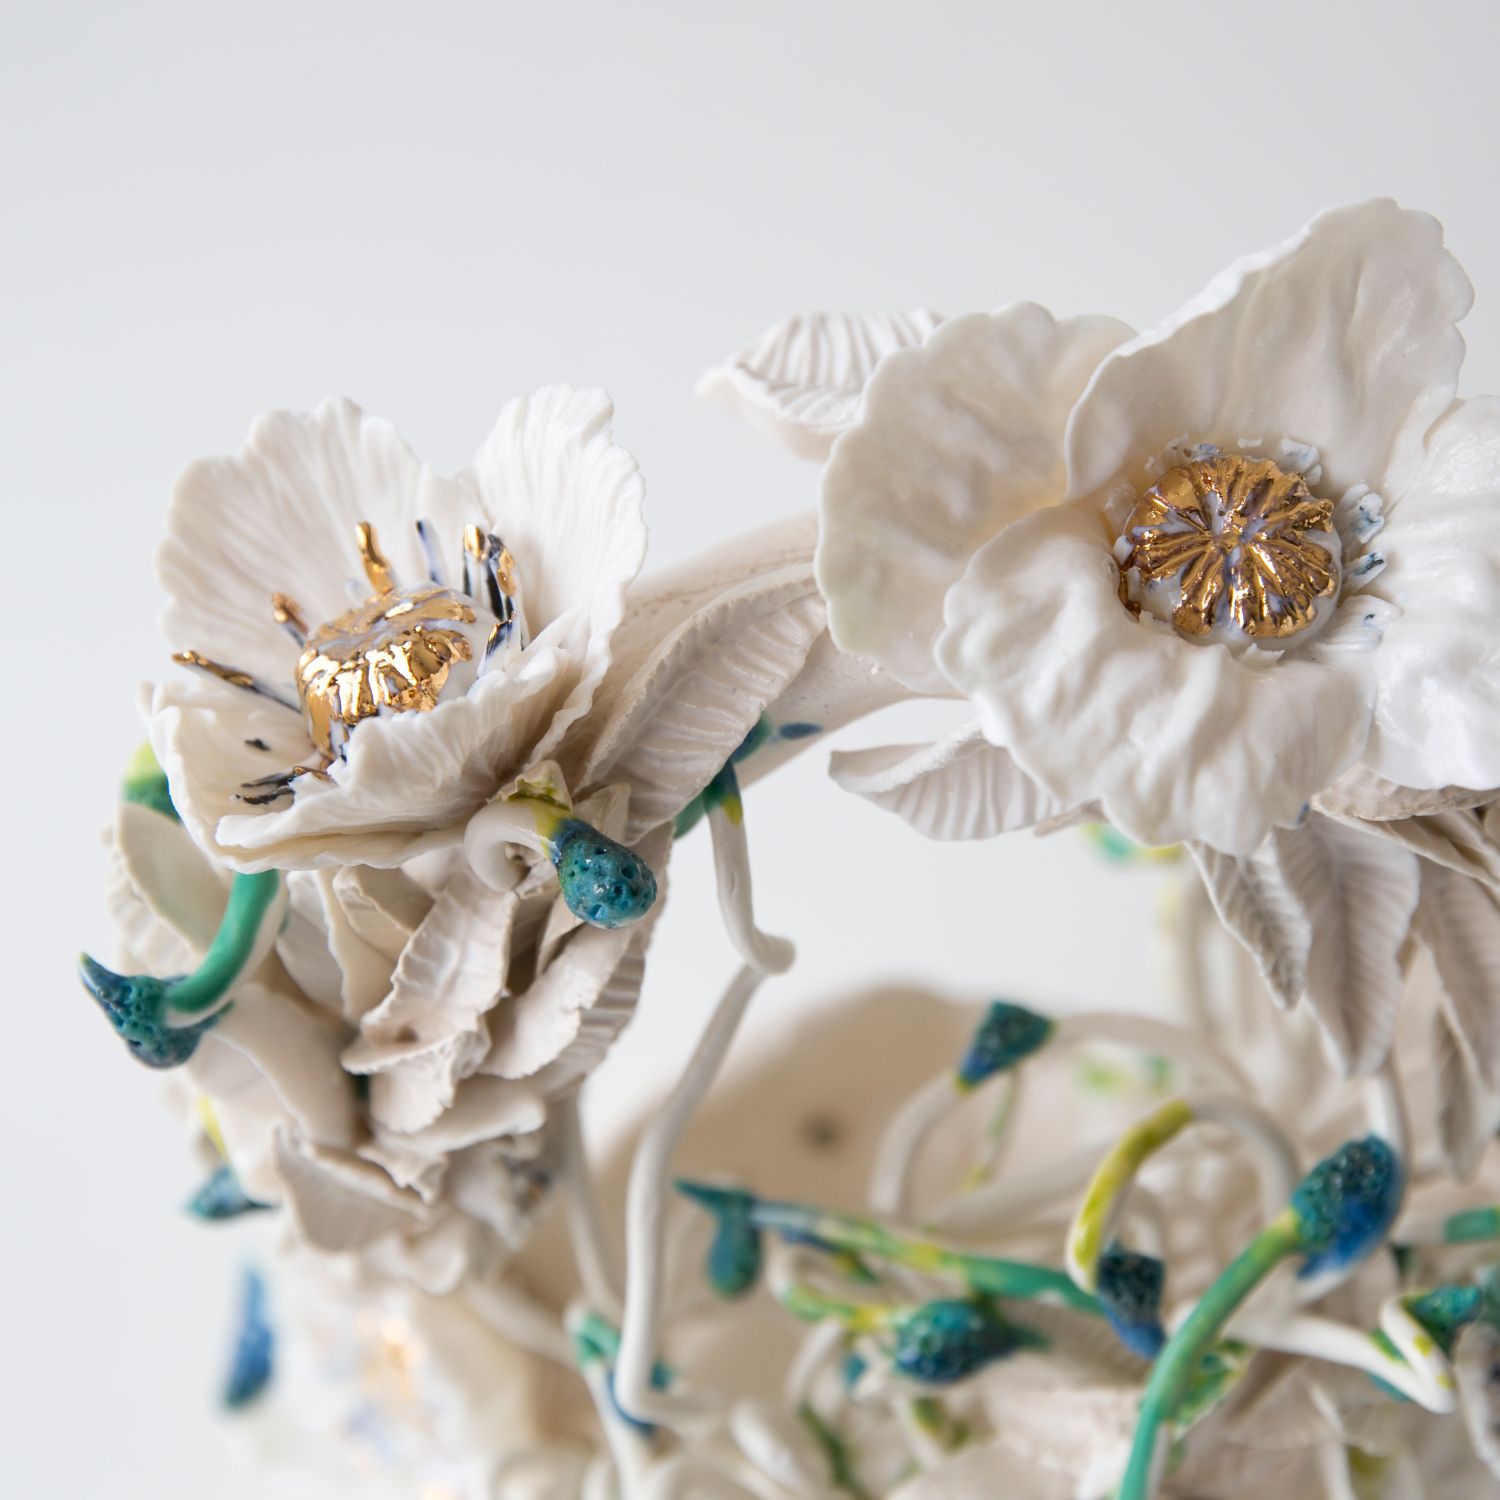 Jess Riva Cooper: Fruiting Bodies and Peonies – Sculpture Product Image 2 of 3